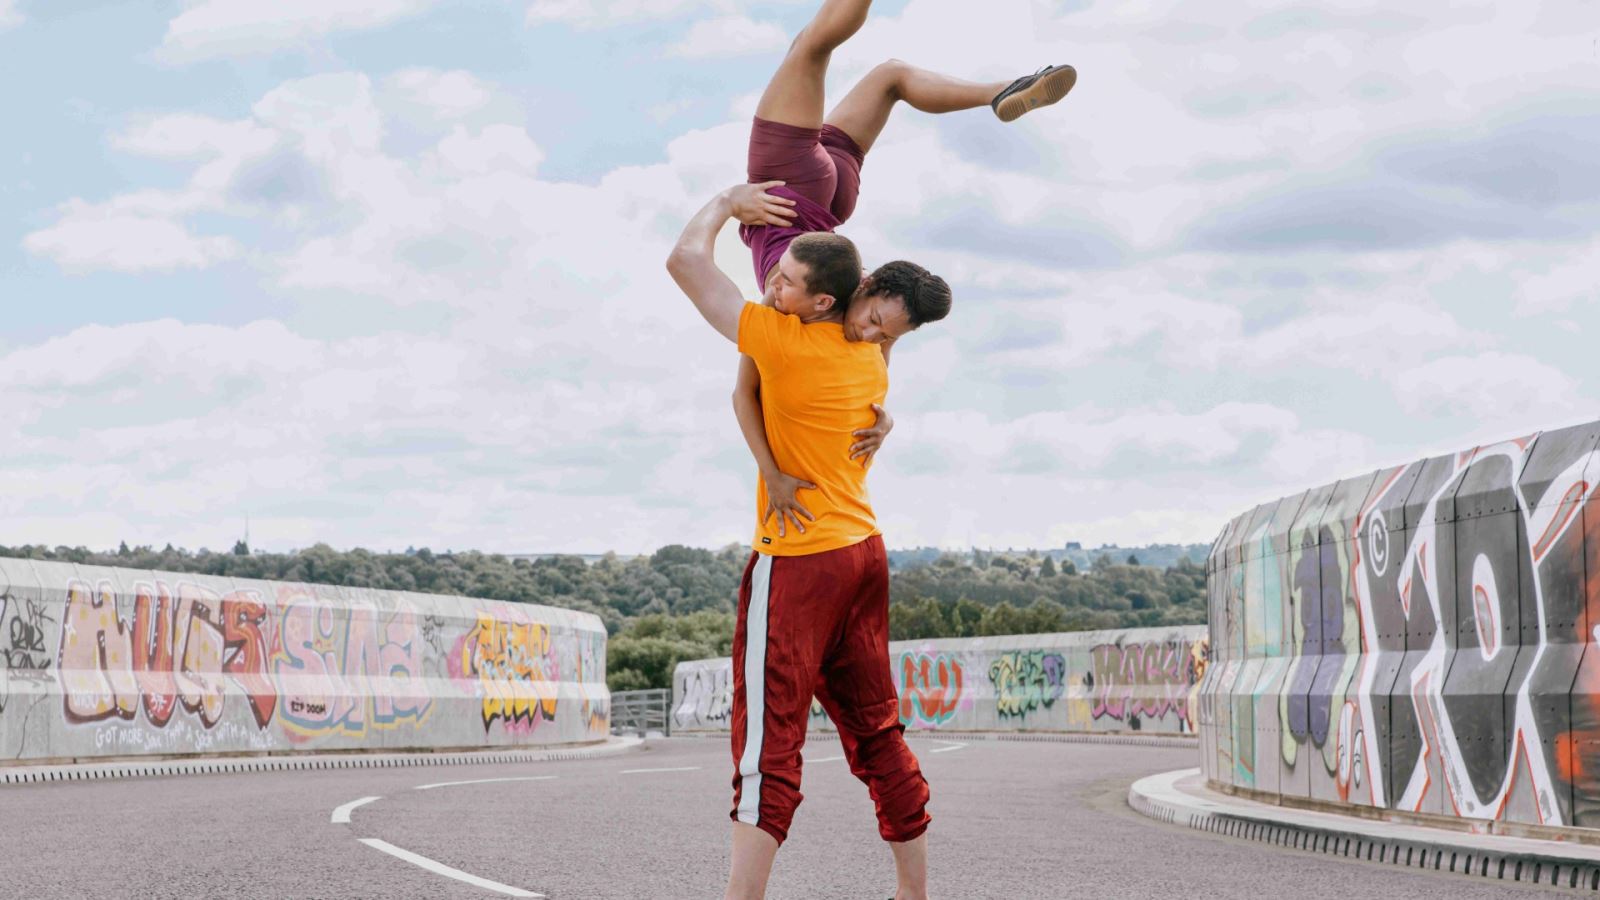 Joana Dias and Mike Corr by Nic Kane for Circus City 